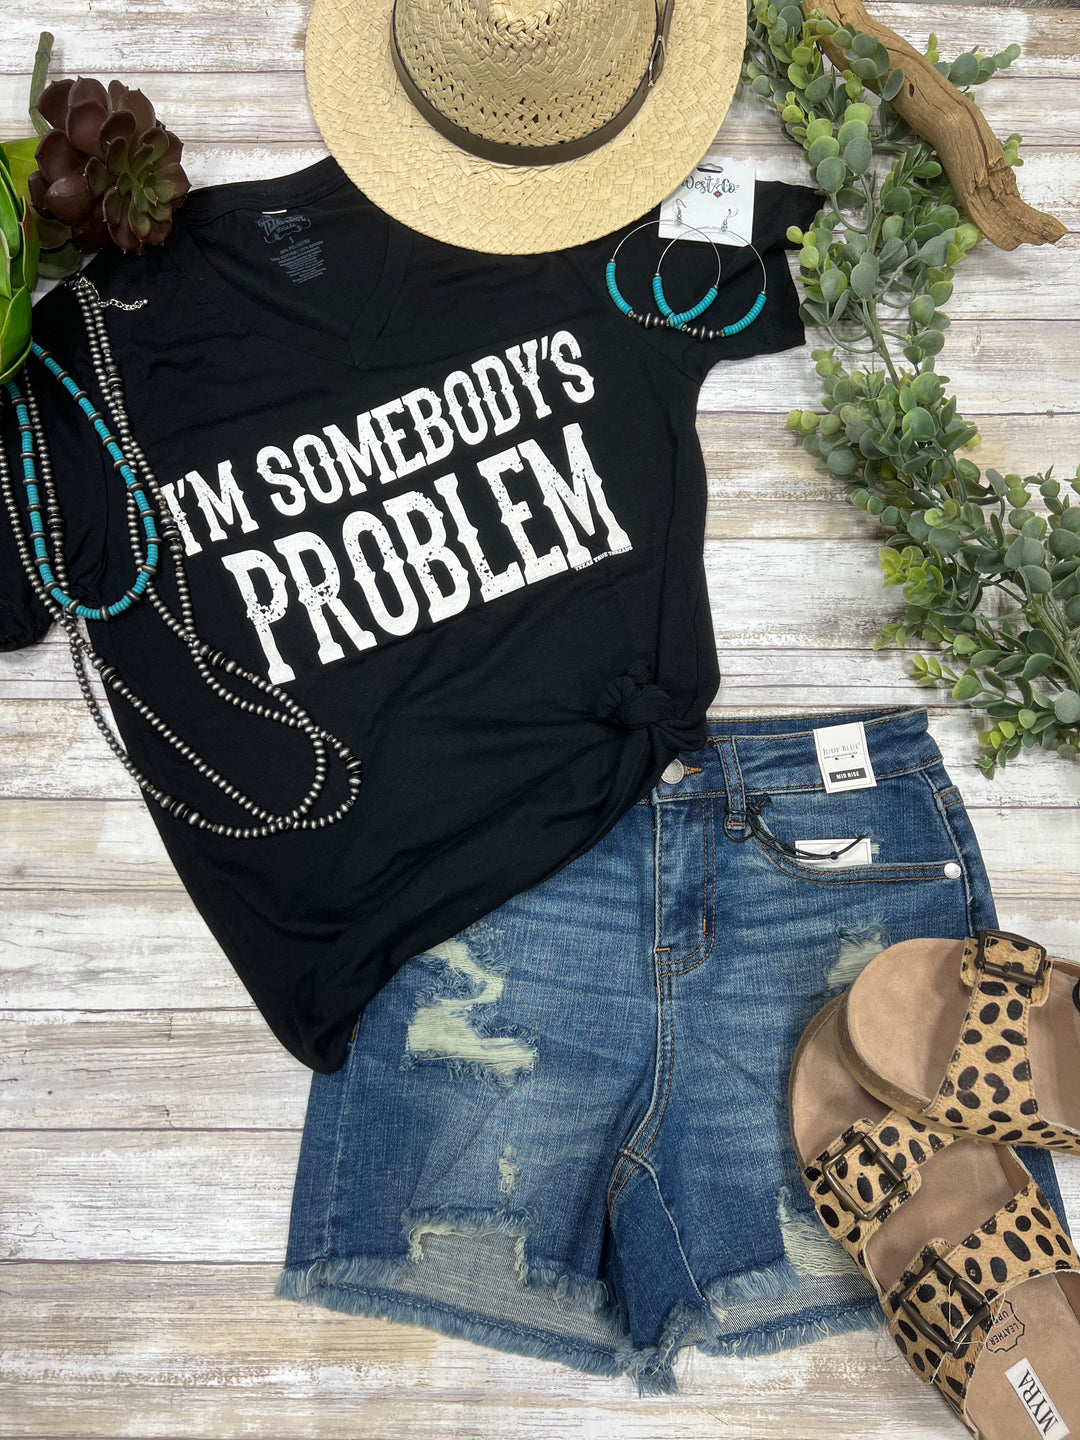 I’m Somebody’s Problem Black Graphic Tee by Texas True Threads